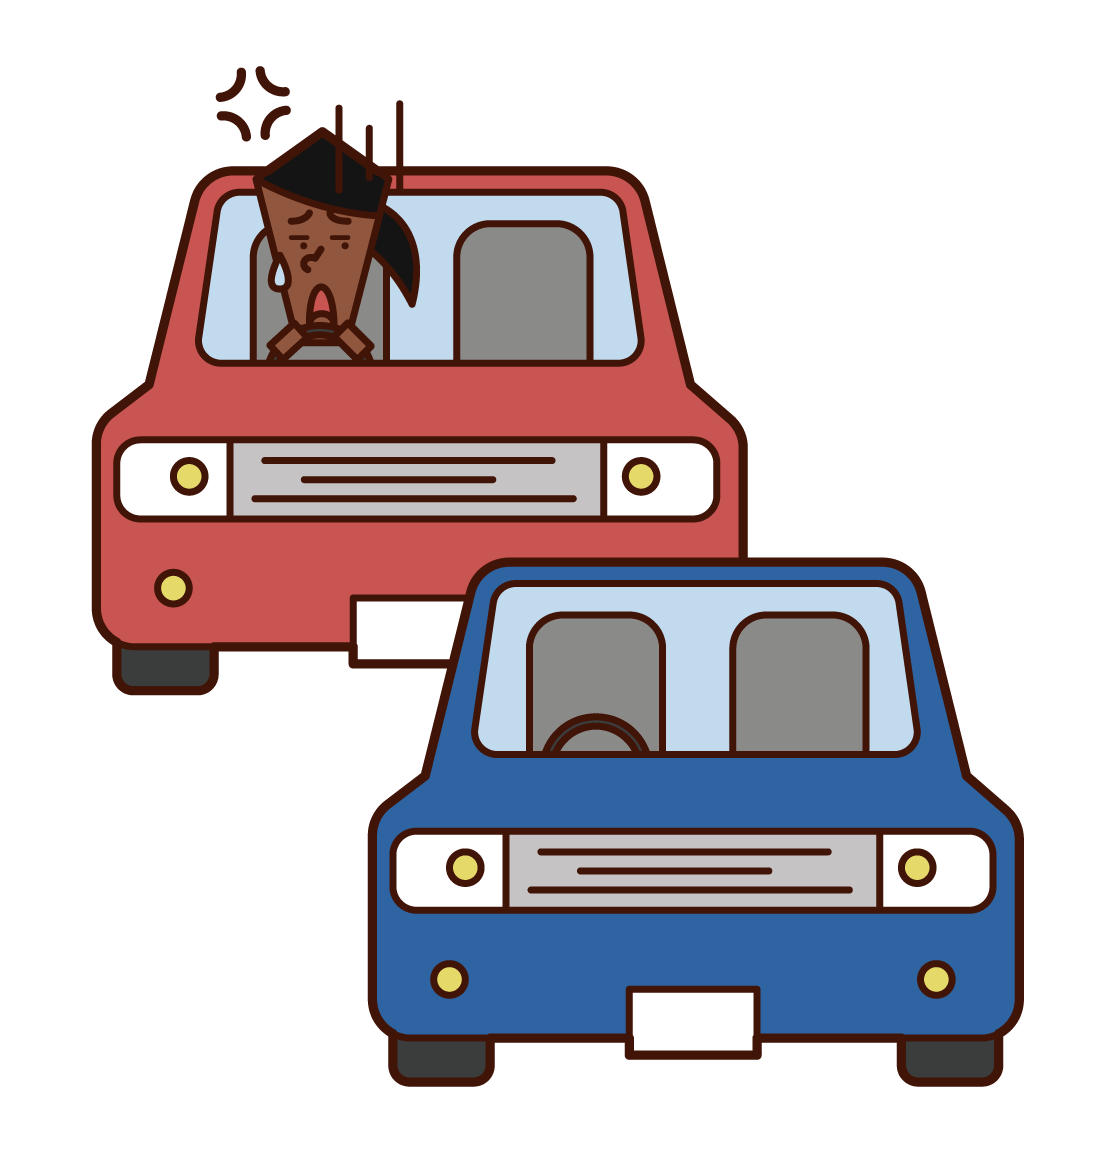 Illustration of illegal parking and nuisance parking of automobiles